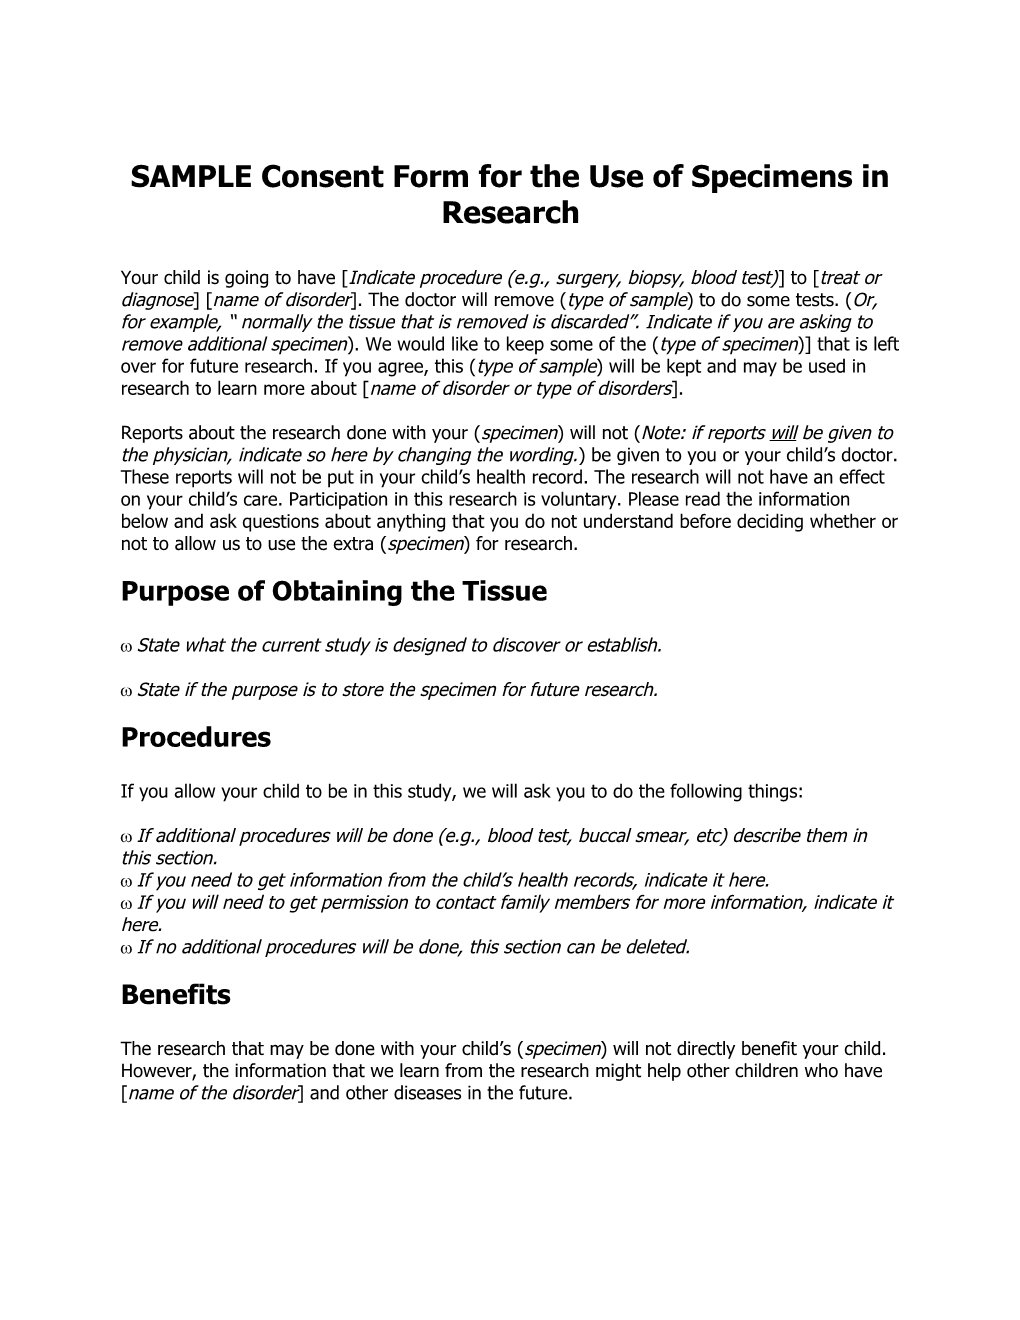 SAMPLE Consent Form for the Use of Specimens in Research